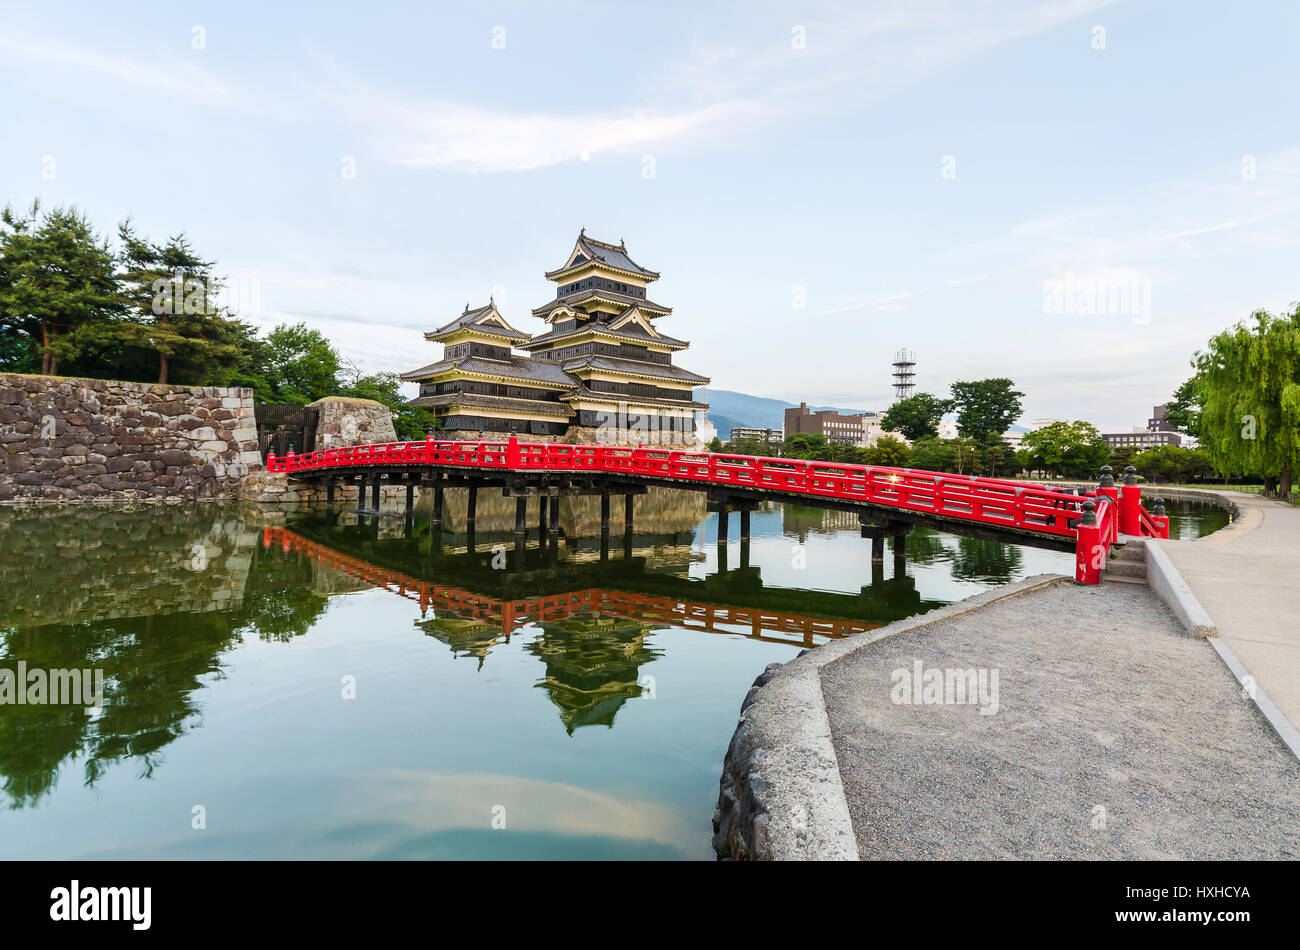 Matsumoto castle reflect on water in evening at nagano japan Stock Photo